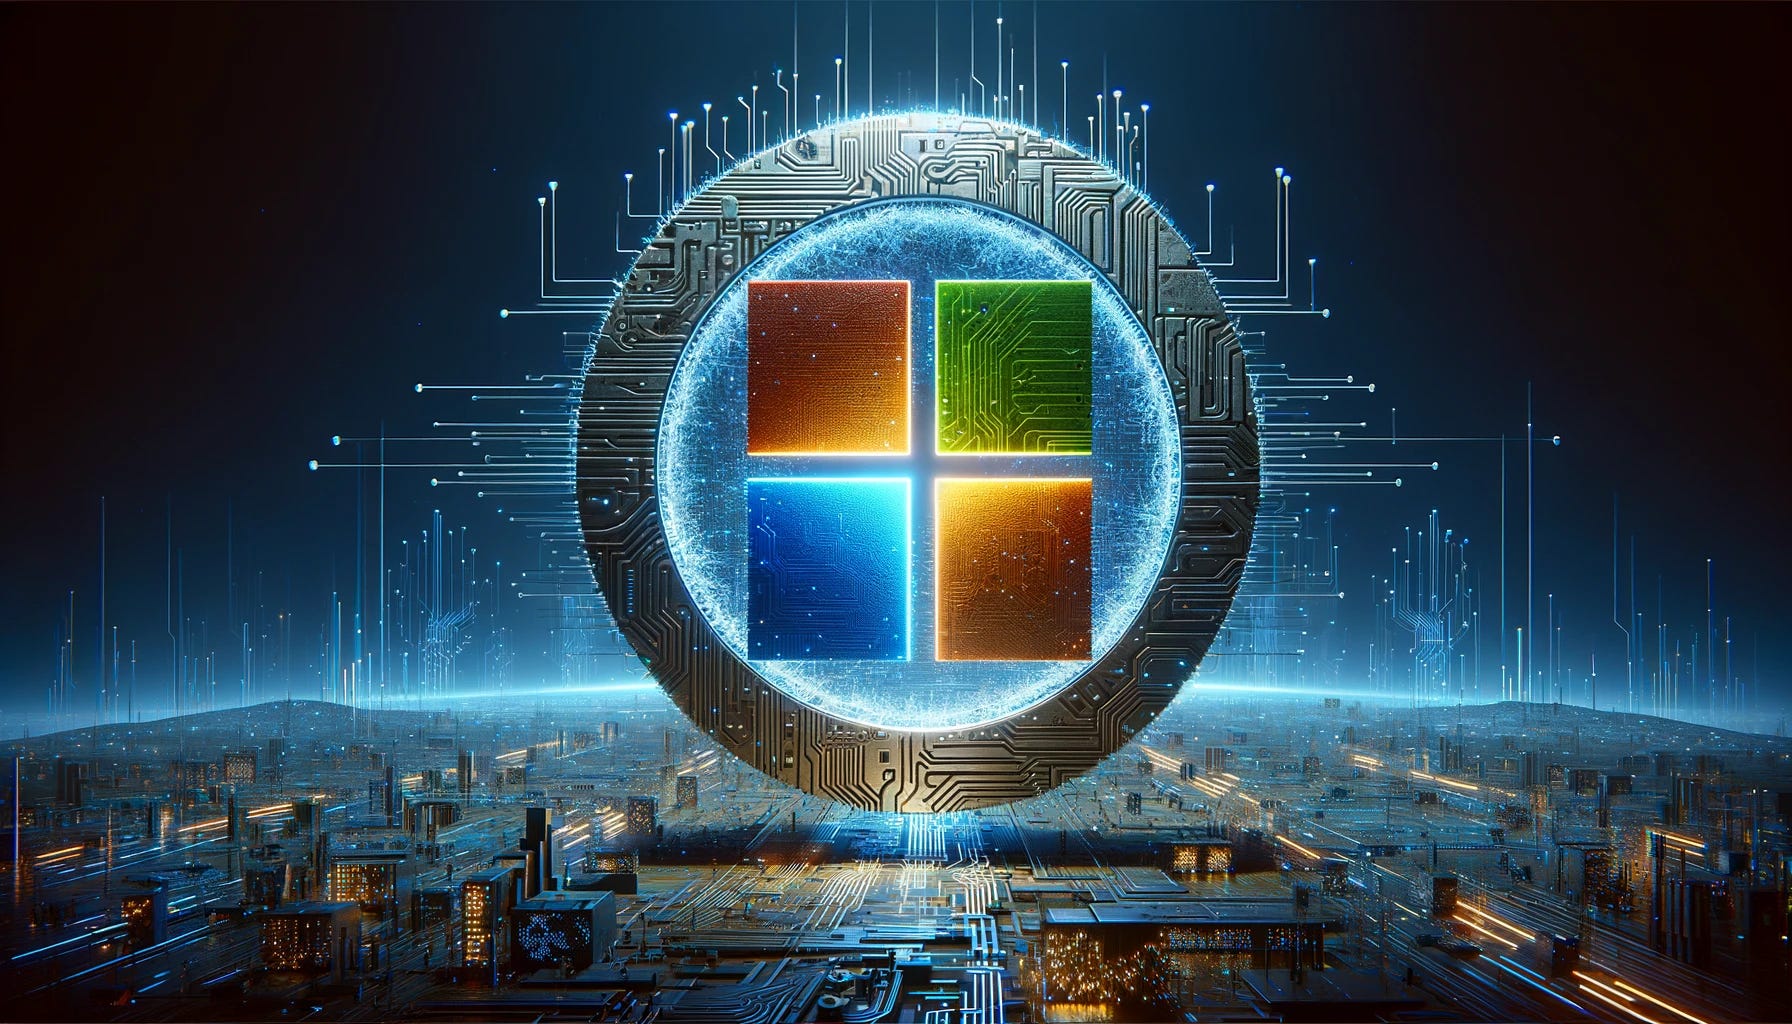 Create a landscape-oriented image depicting the Microsoft logo reimagined as a futuristic cybernetic AI construct. The design should integrate elements that convey advanced technology and artificial intelligence, such as circuit patterns, glowing lines, and digital textures, while maintaining the recognizable aspects of the Microsoft logo. The logo should appear as if it's been brought to life through cybernetics, standing against a backdrop that suggests a high-tech environment, possibly with hints of a digital landscape or a cyberpunk cityscape. The overall aesthetic should be sleek and modern, highlighting the fusion of the Microsoft brand with futuristic AI and cybernetic themes.